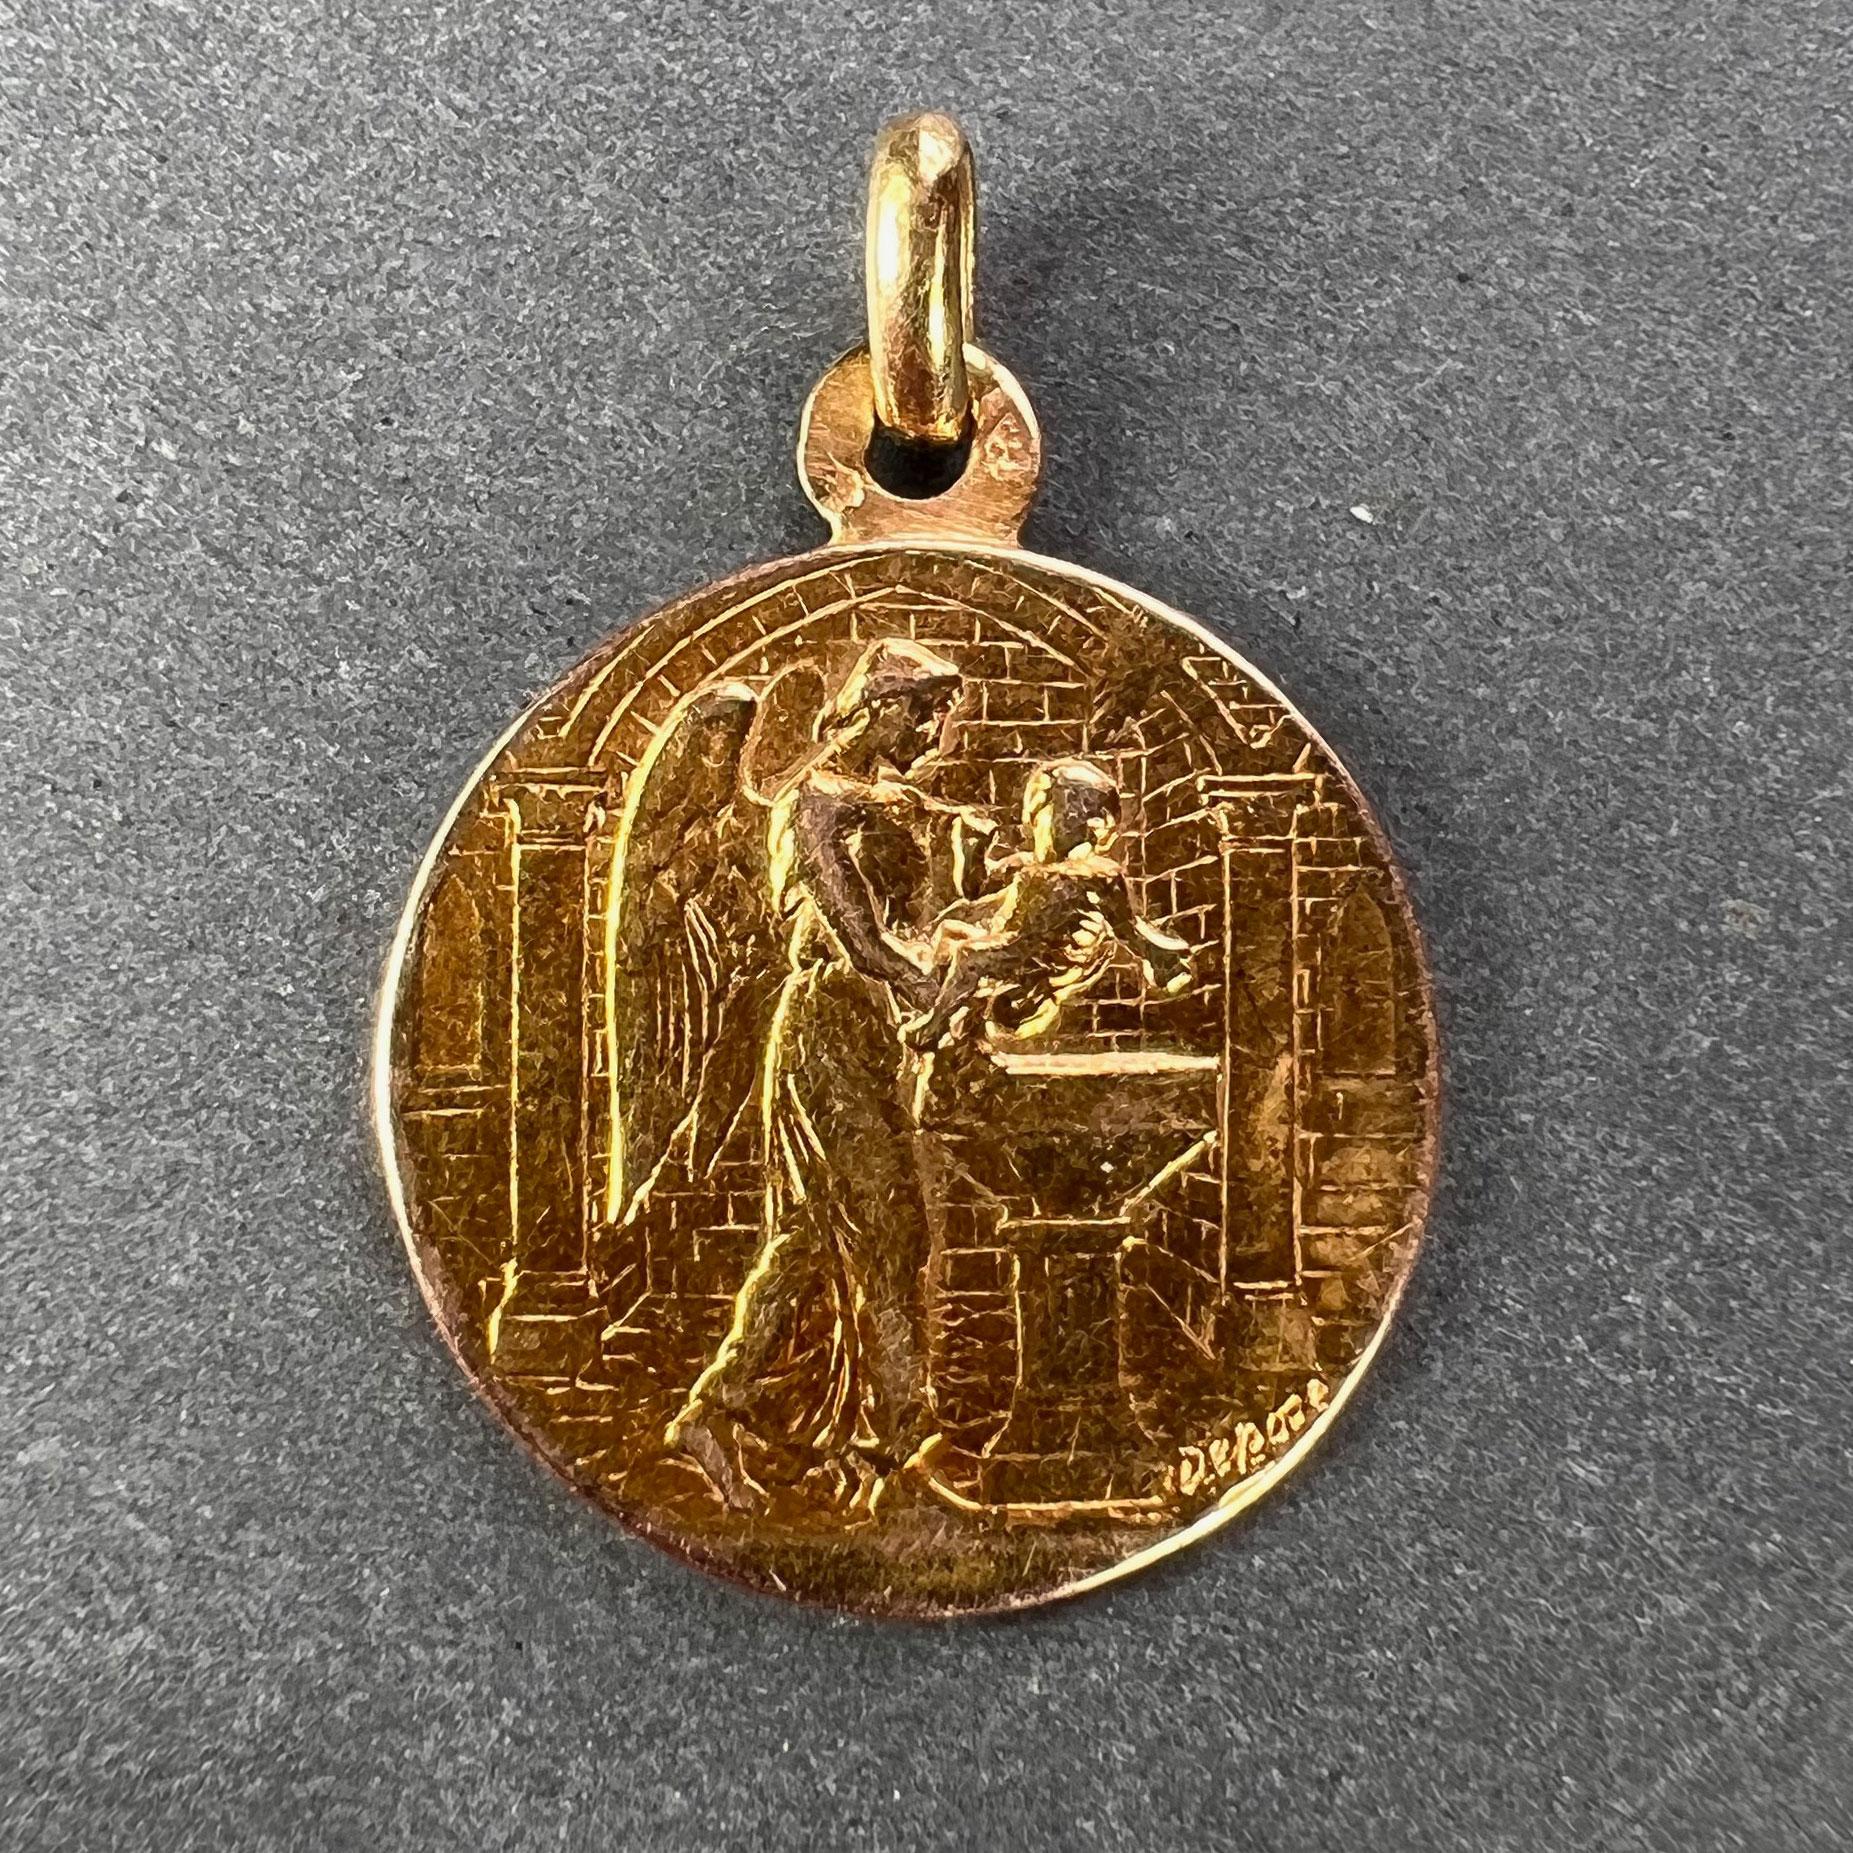 An 18 karat (18K) yellow gold charm pendant depicting an angel holding an infant over a font for baptism. Engraved to the reverse ‘SUZANNE’ and the date 26 Aout 1900. Stamped with the eagle mark for 18 karat gold and French manufacture and marked